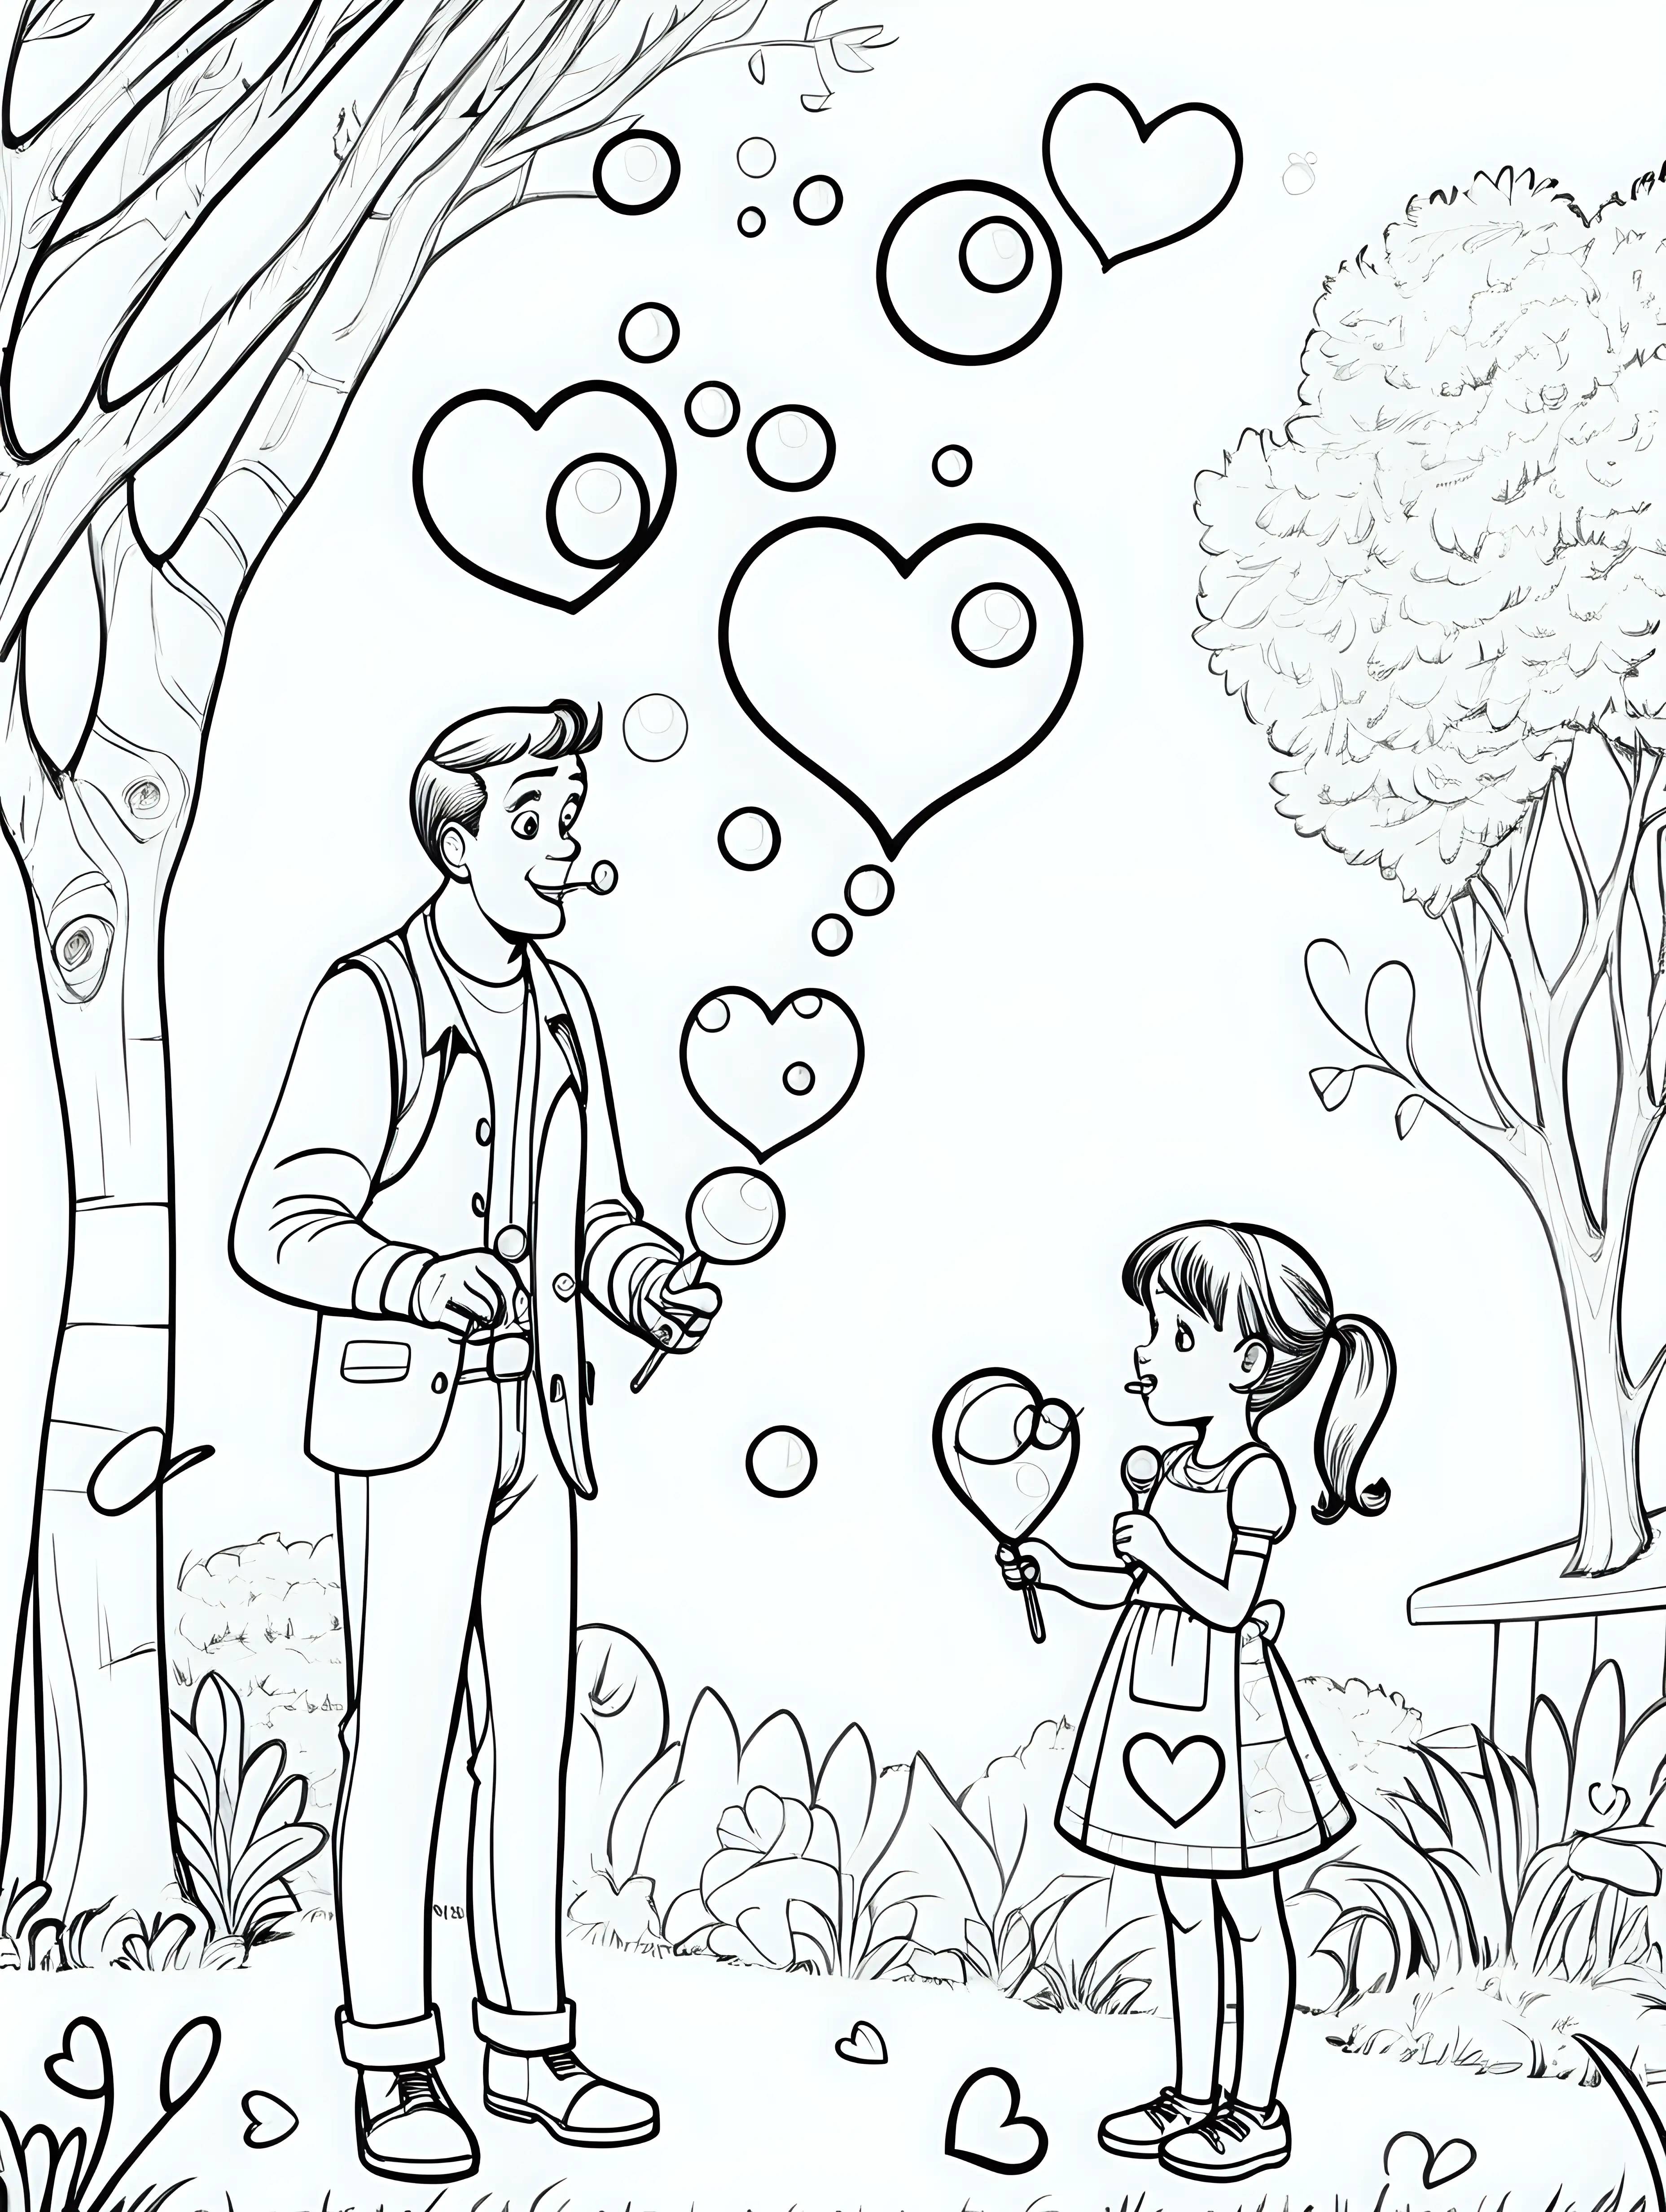 Cute, fairytale, whimsical, cartoon, younger Daddy and daughter blowing bubbles in the backyard with heart-shaped wands, black and white, thin lines, coloring page, simplistic, aspect ratio 9:11, no shading